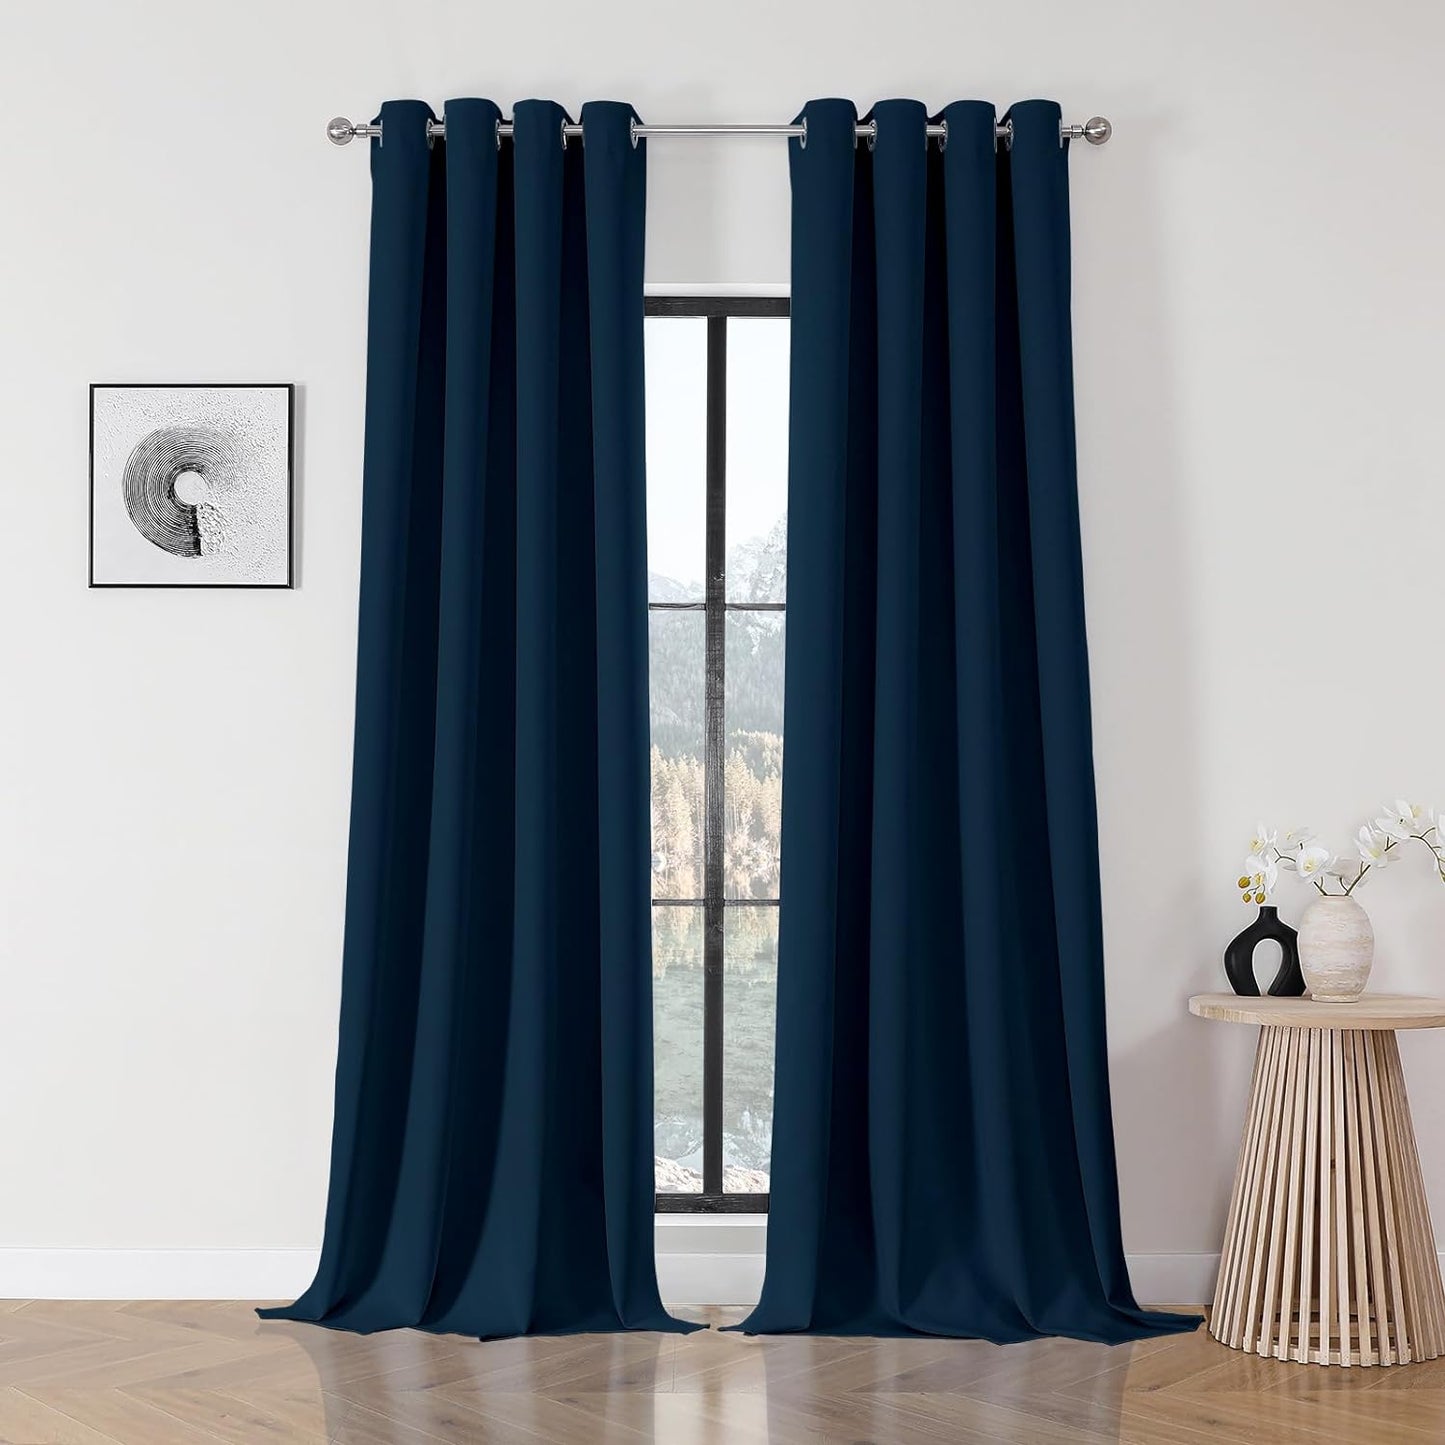 Joydeco Blackout Curtains 84 Inch Length 2 Panels Set, Thermal Insulated Long Curtains& Drapes 2 Burg, Room Darkening Grommet Curtains for Bedroom Living Room Window (Black, W52 X L84 Inch)  Joydeco Navy Blue 52W X 108L Inch X 2 Panels 